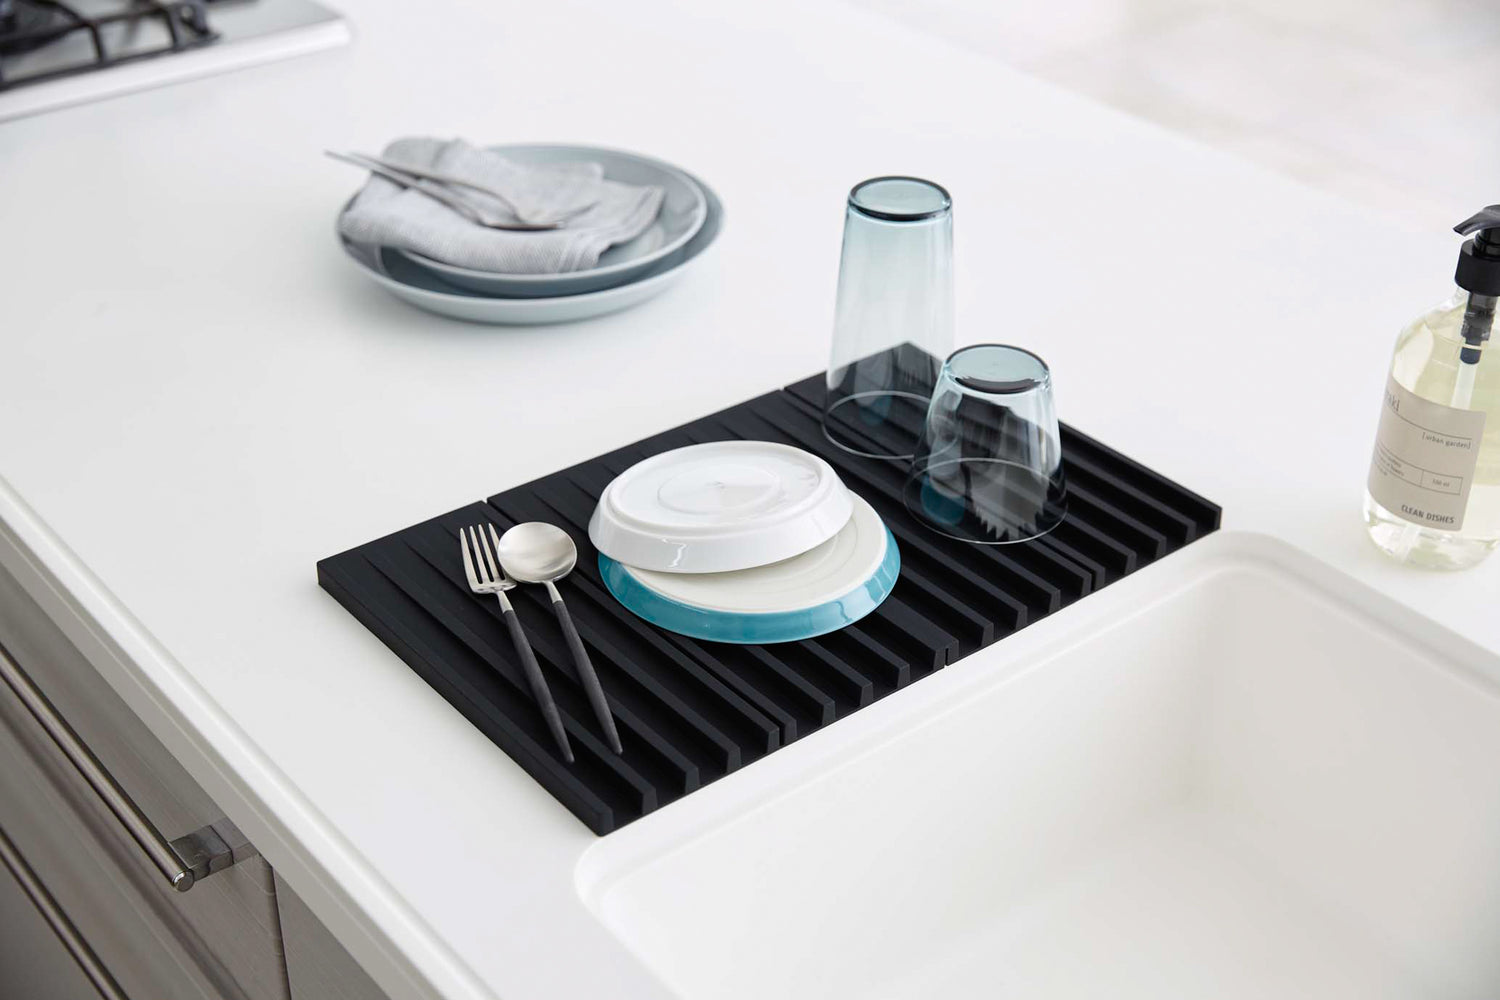 View 8 - Black Folding Dish Drainer Mat holding plates, cups, and silverware on kitchen counter by Yamazaki Home.